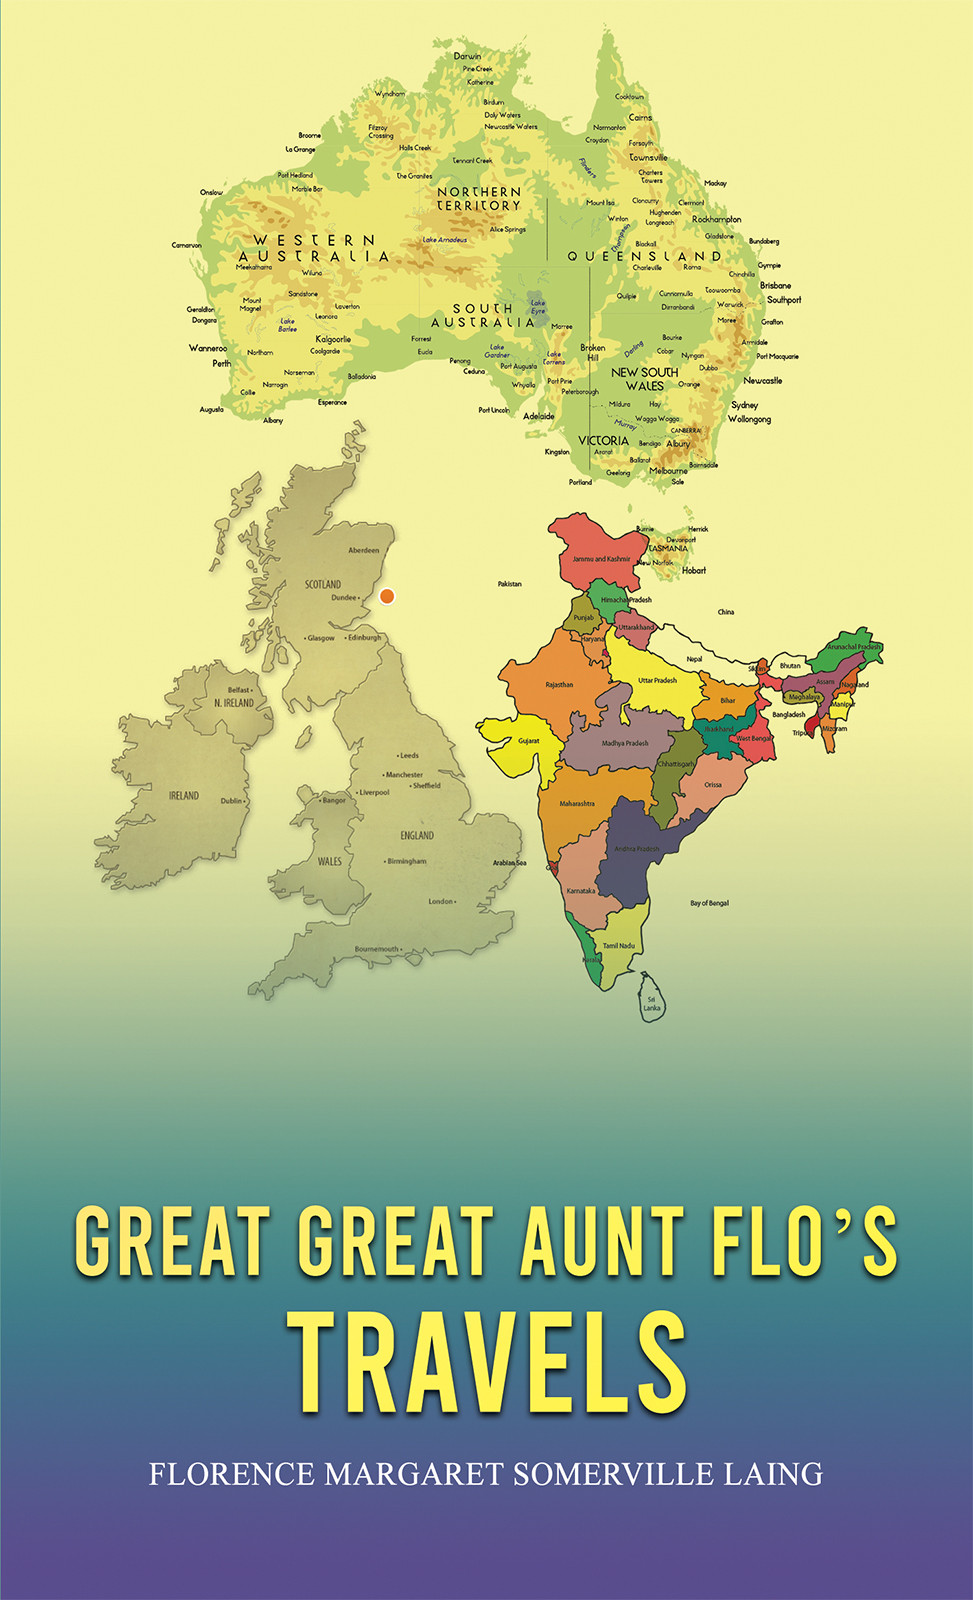 Great Great Aunt Flo's Travels-bookcover